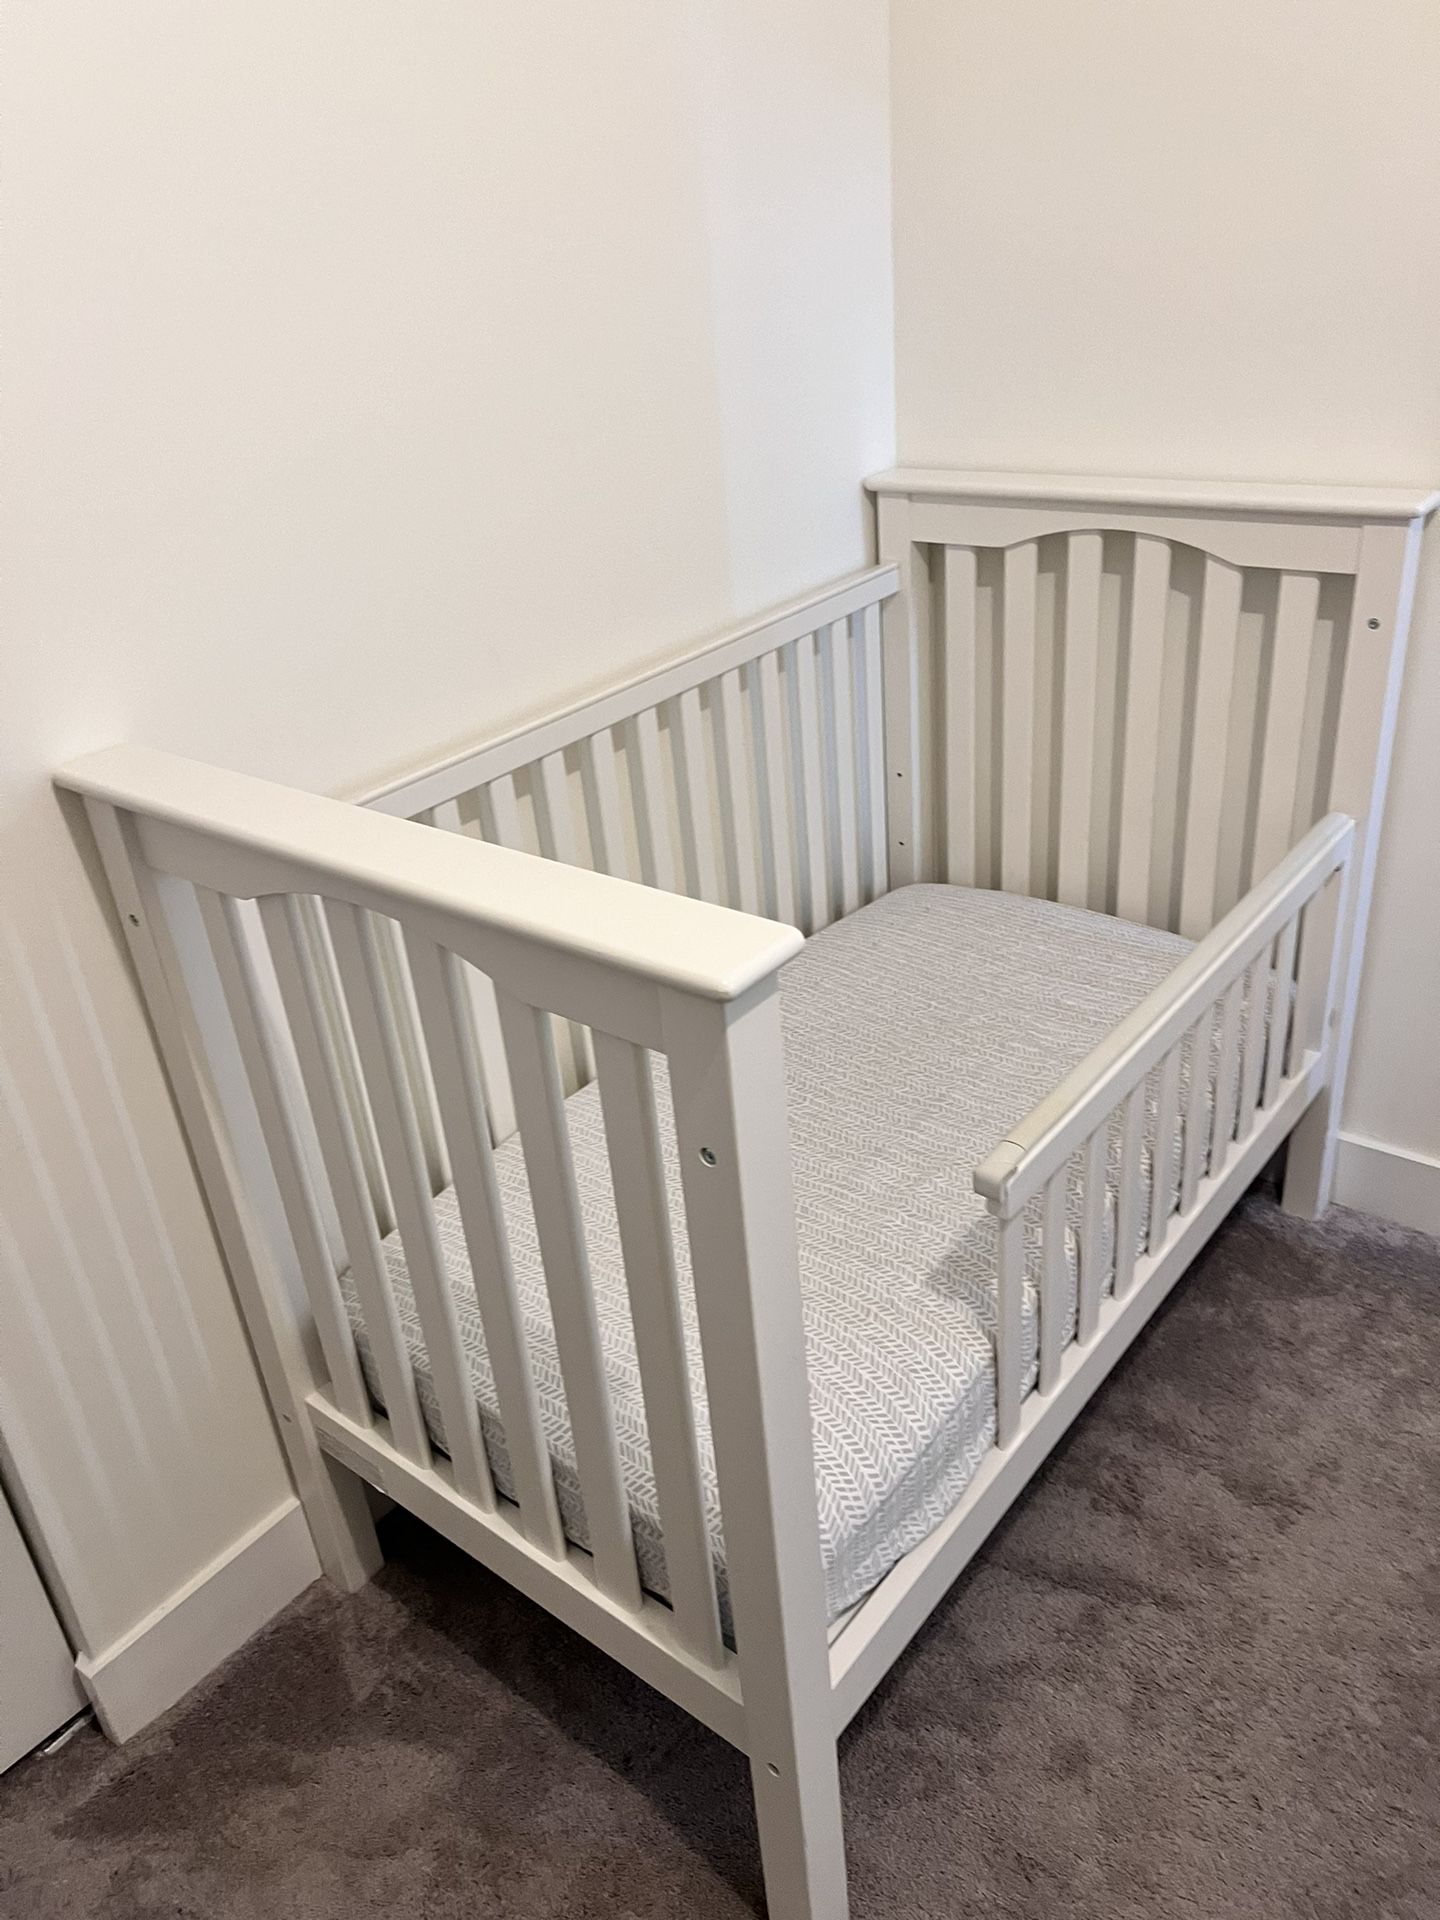 Pottery Bark Kids Kendall Convertible Crib WITH conversion kit included.  Used but in excellent condition with Minor wear.  Pottery Barn Kids Mattress